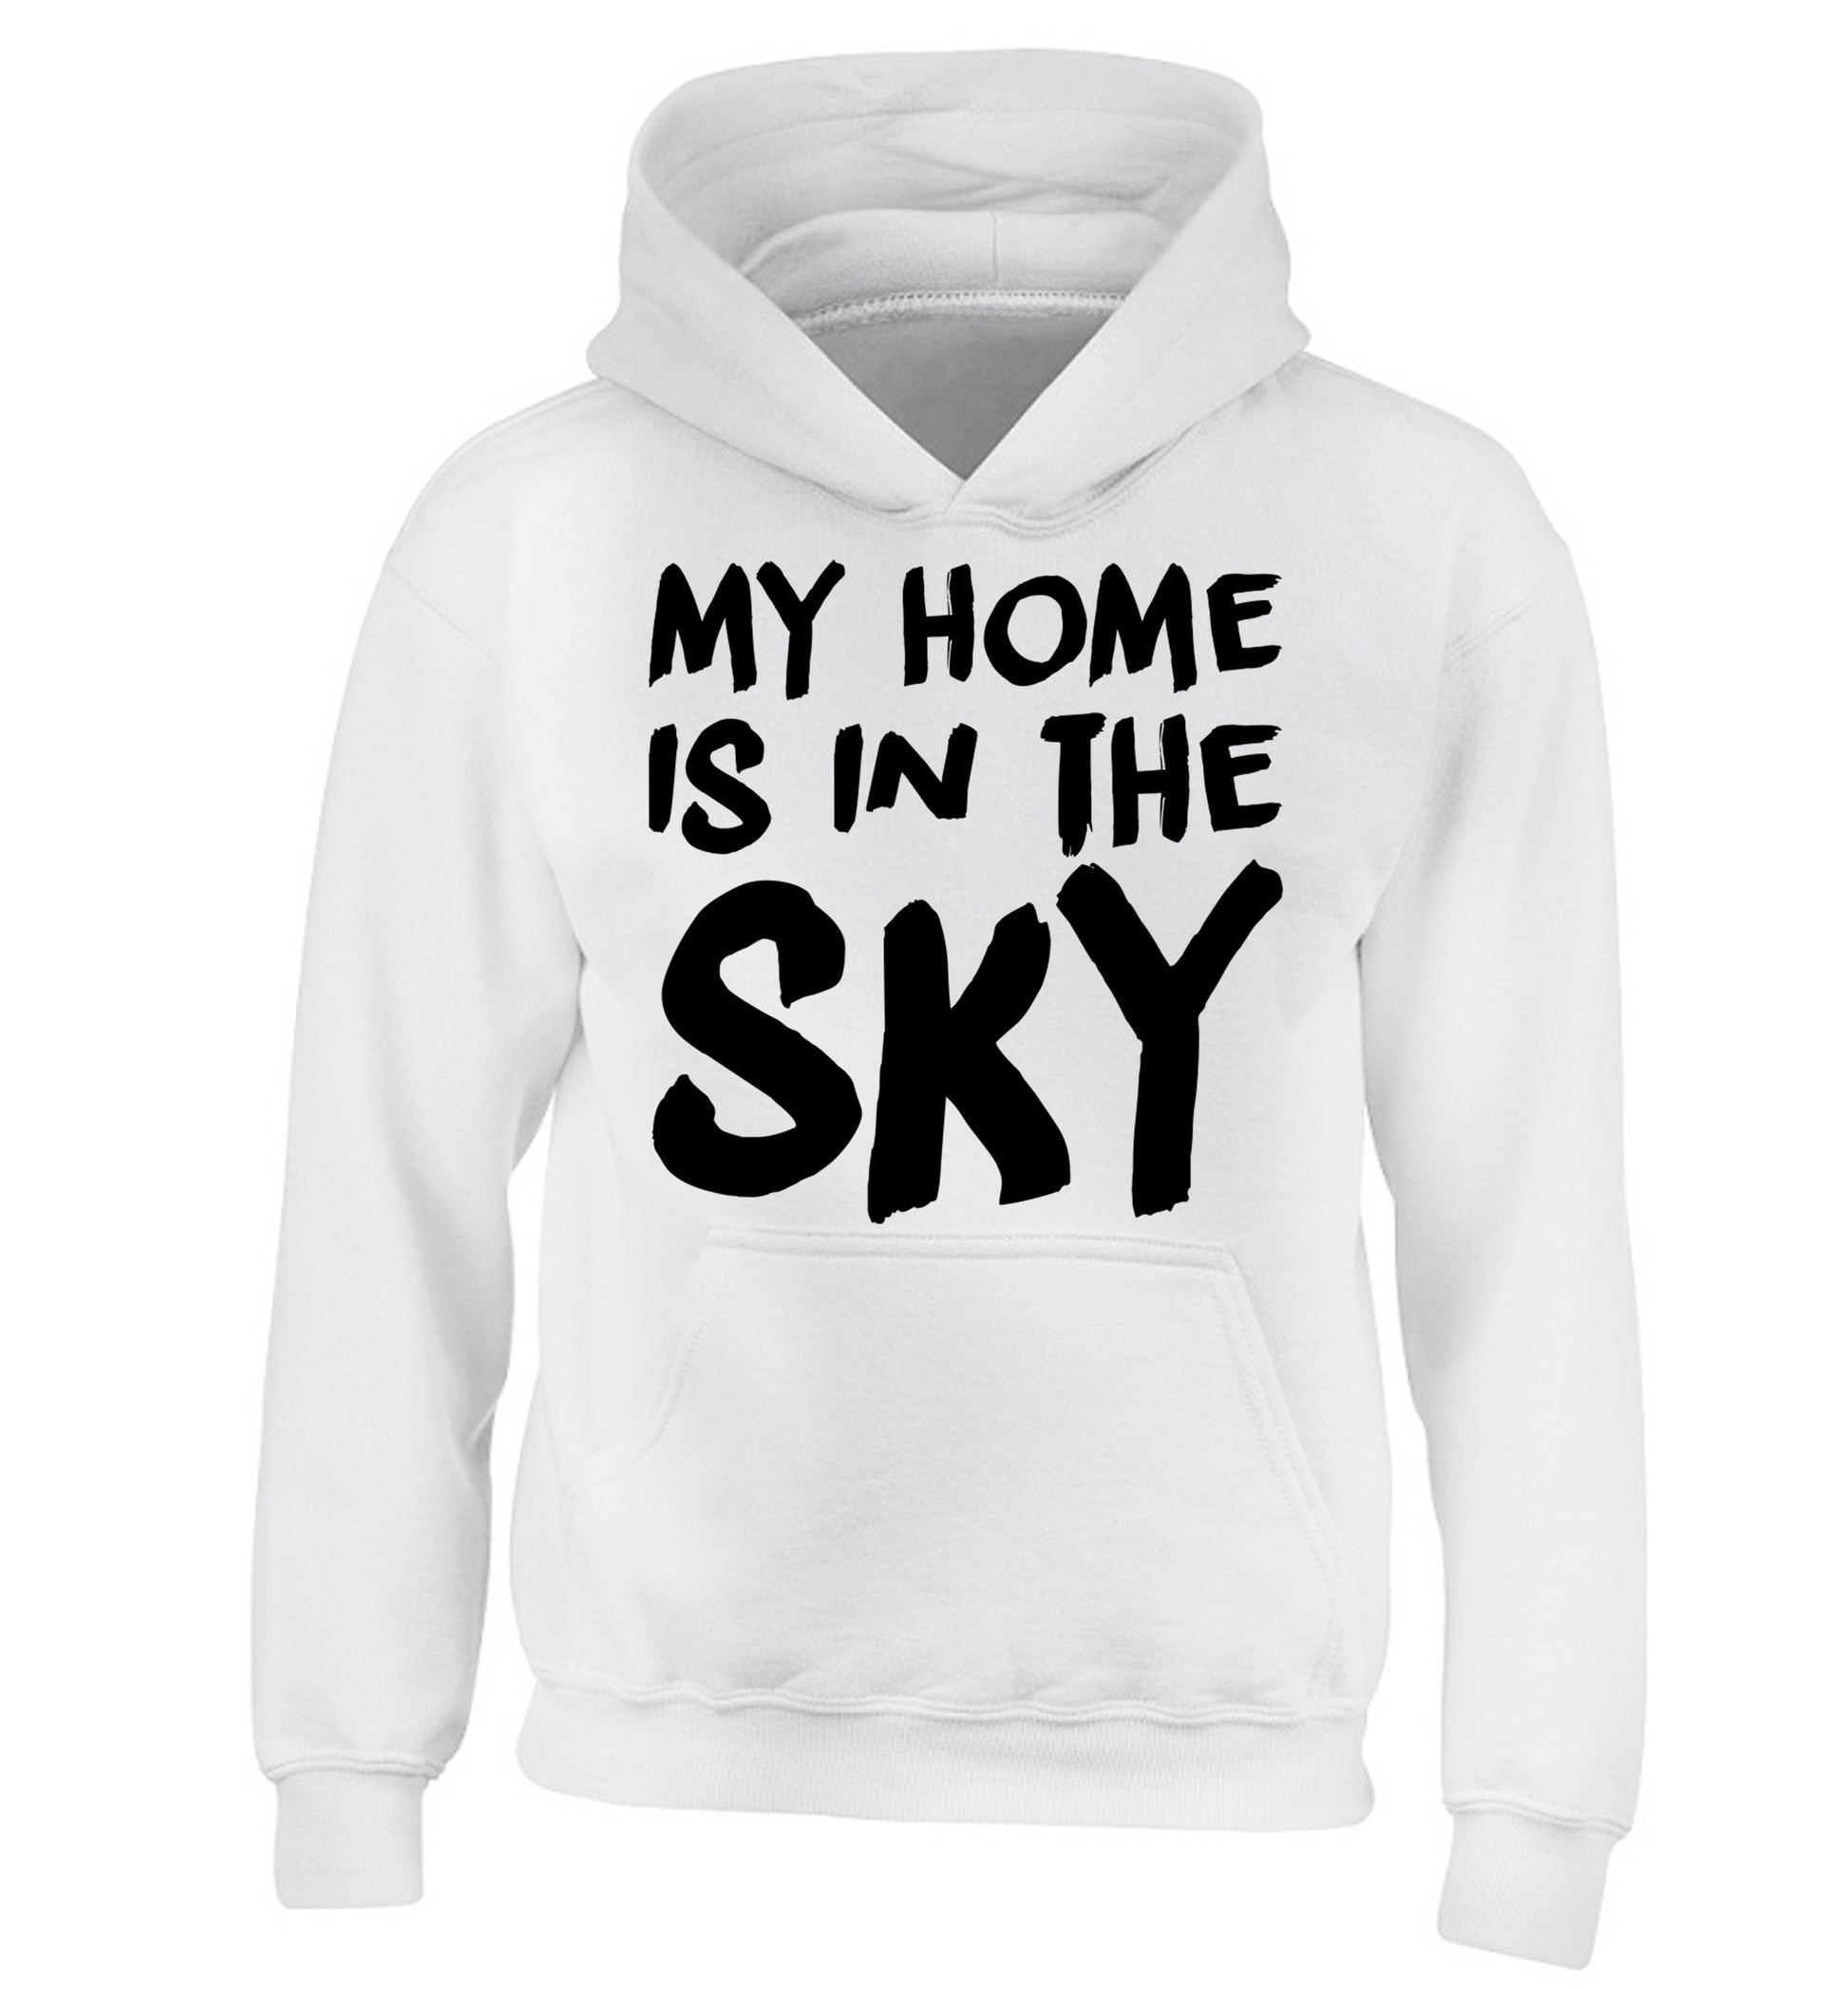 My home is in the sky children's white hoodie 12-14 Years